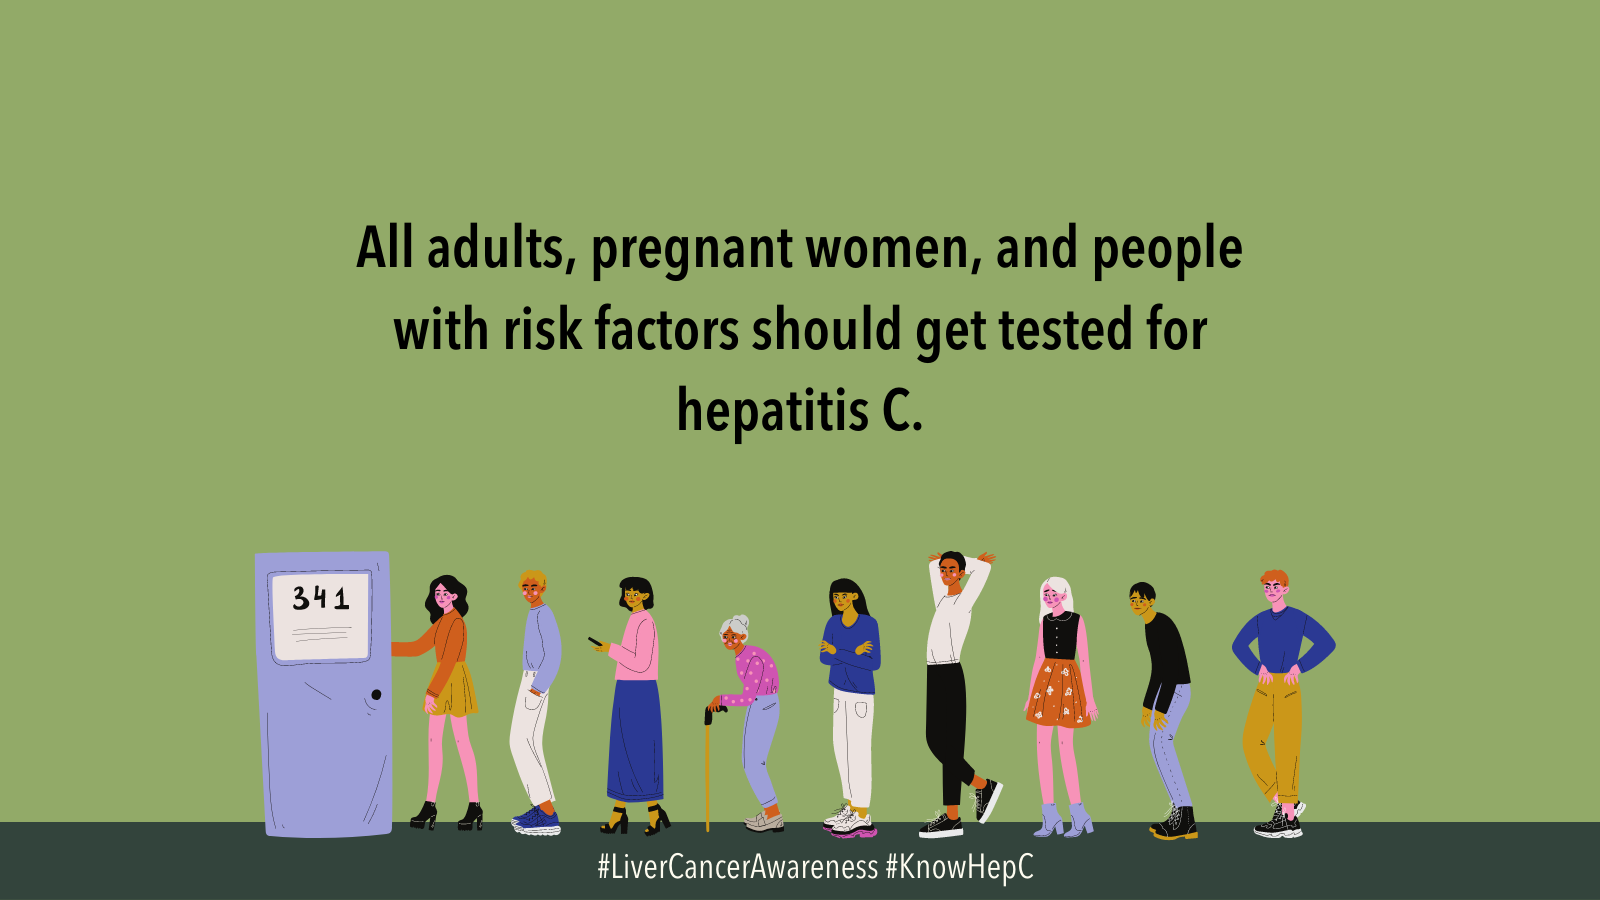 Group of people waiting in line. Text above reads: All adults, pregnant women, and people with risk factors should get tested for hepatitis C. 